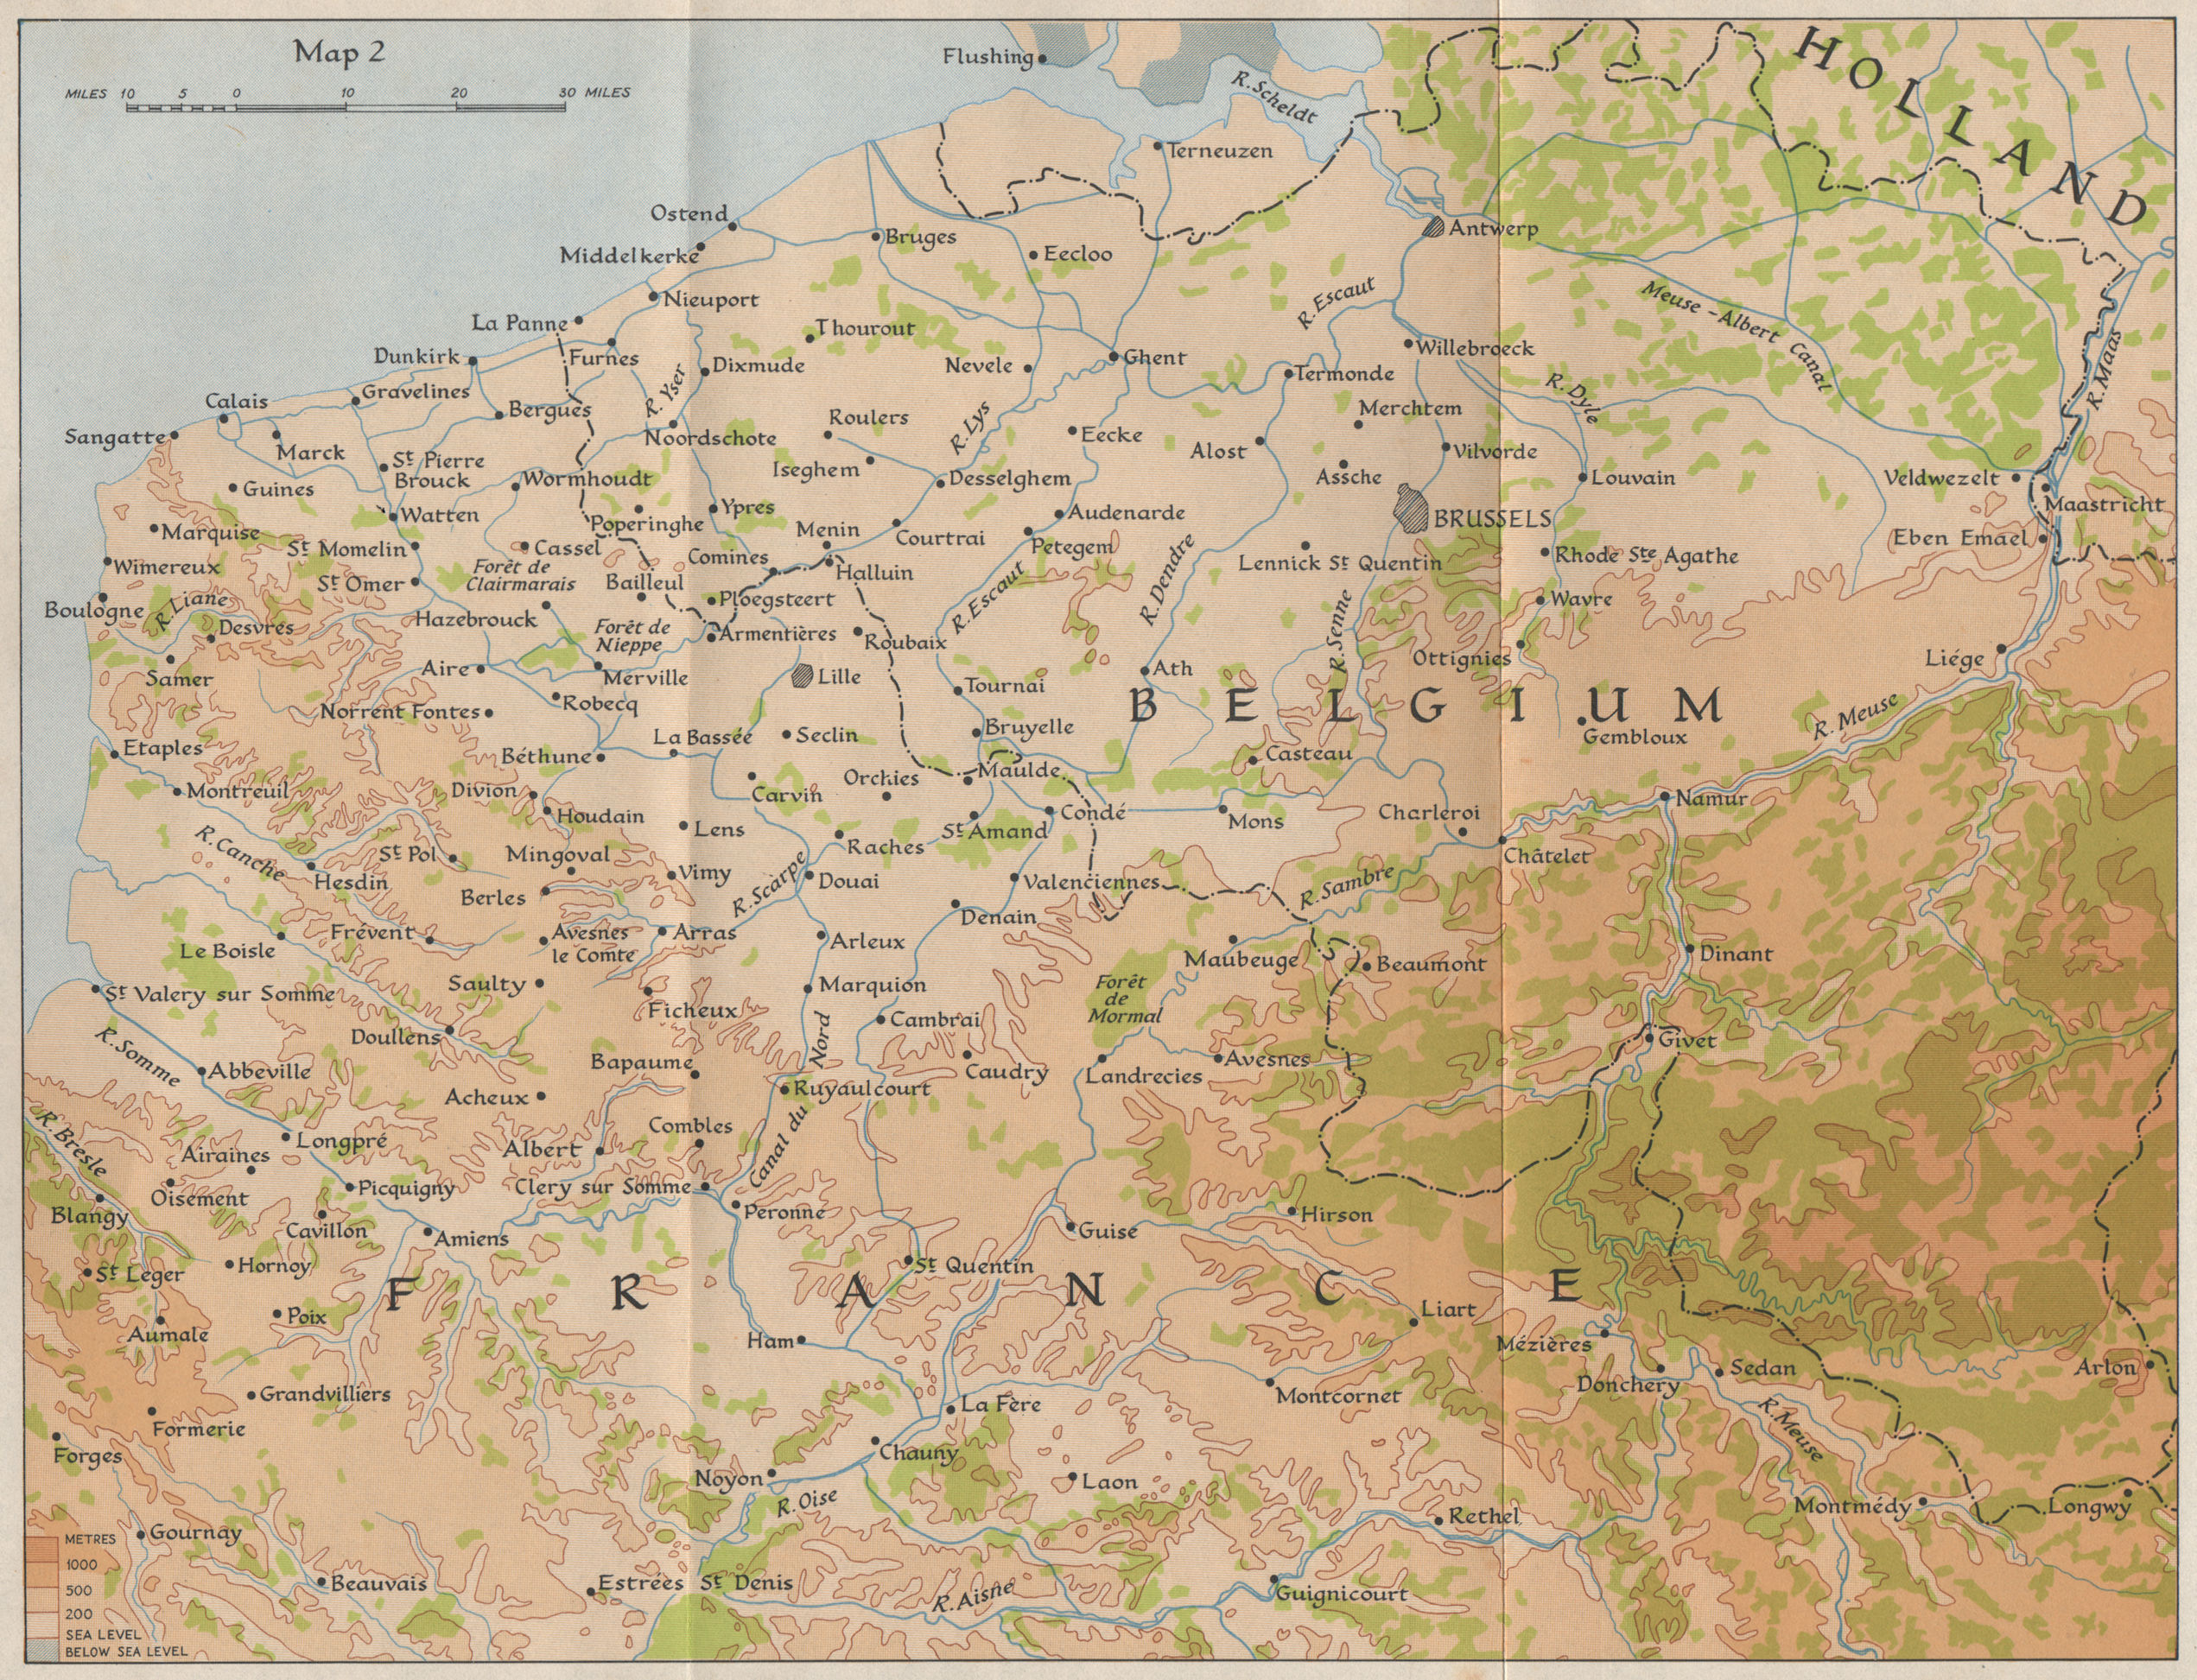 Associate Product FLANDERS IN 1940. Northern France & Belgium. HMSO 1953 old vintage map chart